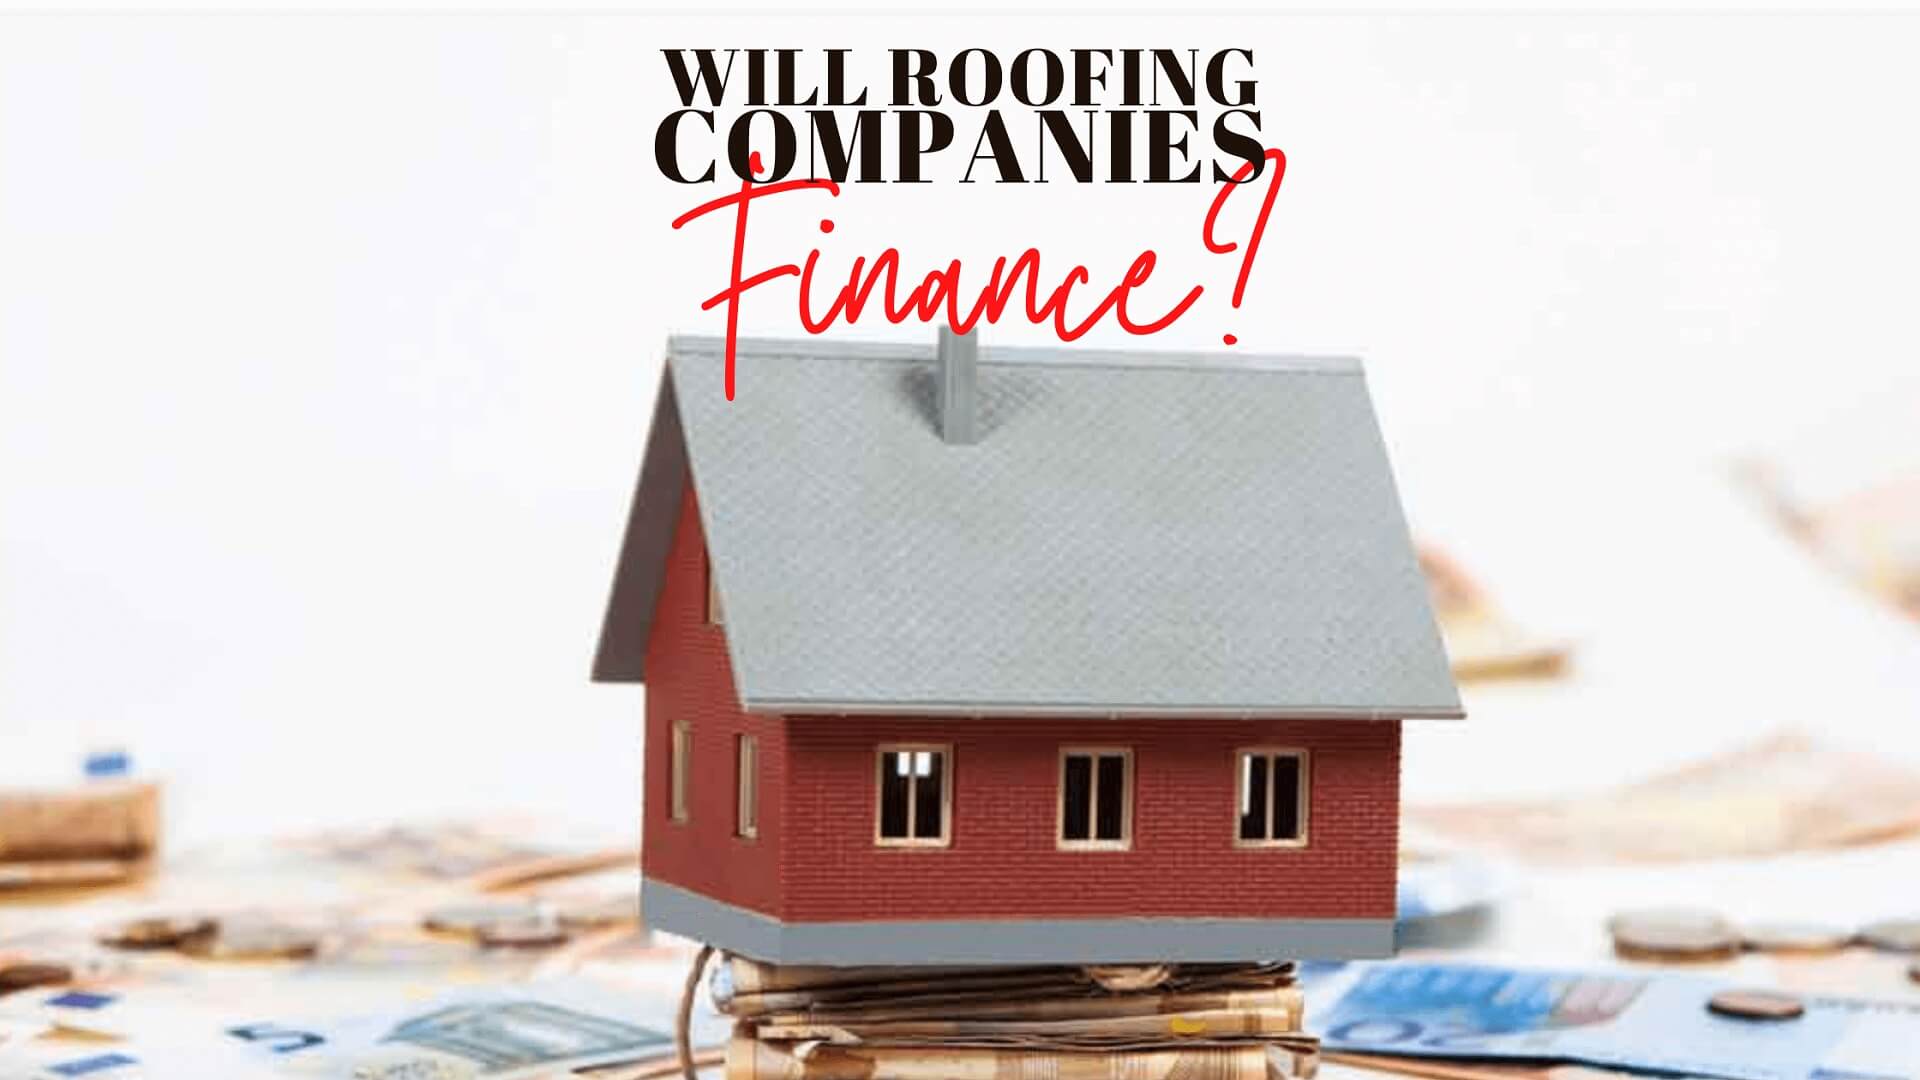 Will_roofing companies_finance